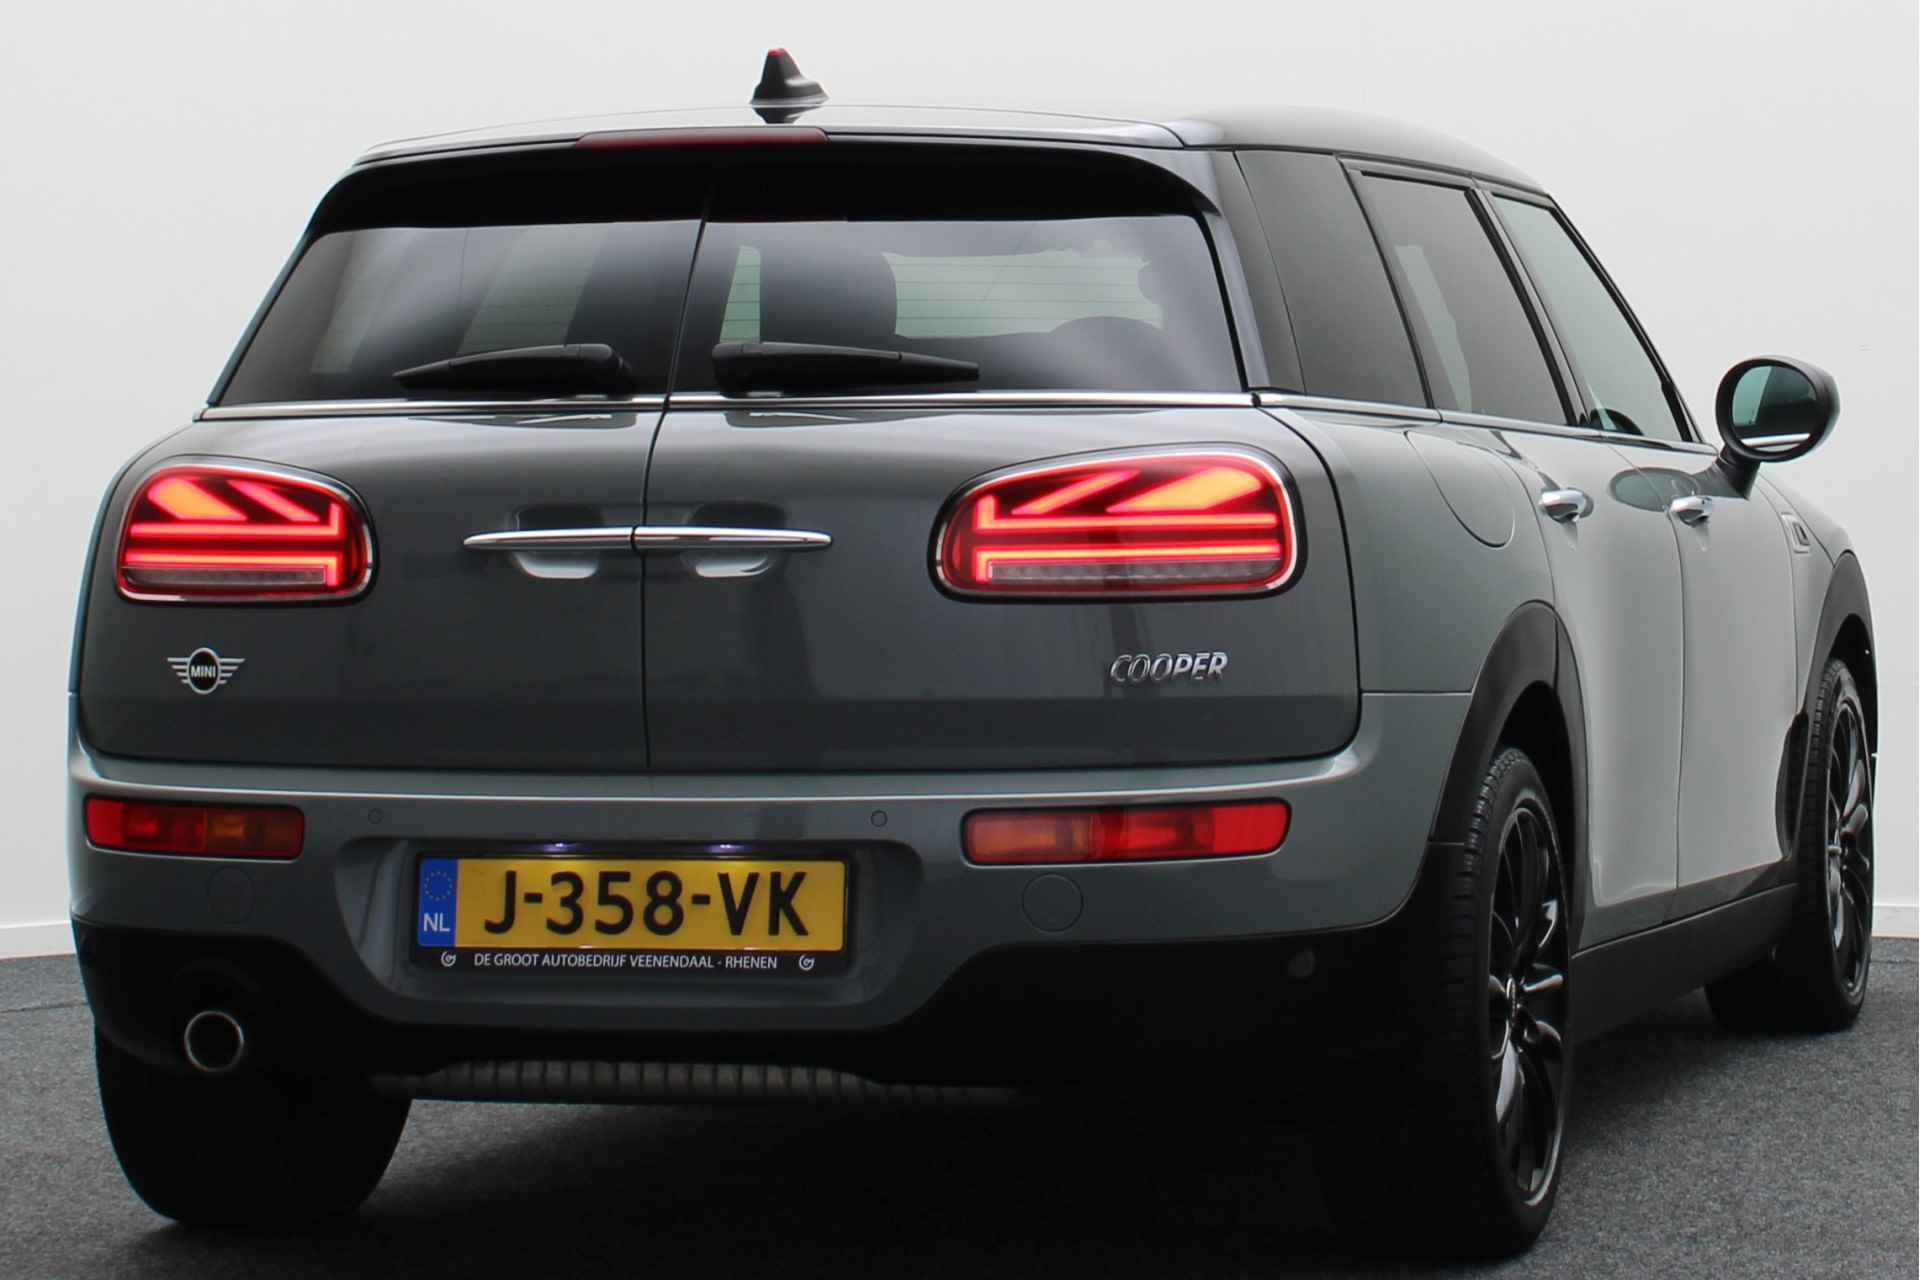 MINI Clubman 1.5 Cooper Business Edition Automaat LED, Keyless, Two-Tone lak, Navigatie, Cruise, PDC, Climate, 17” - 17/44